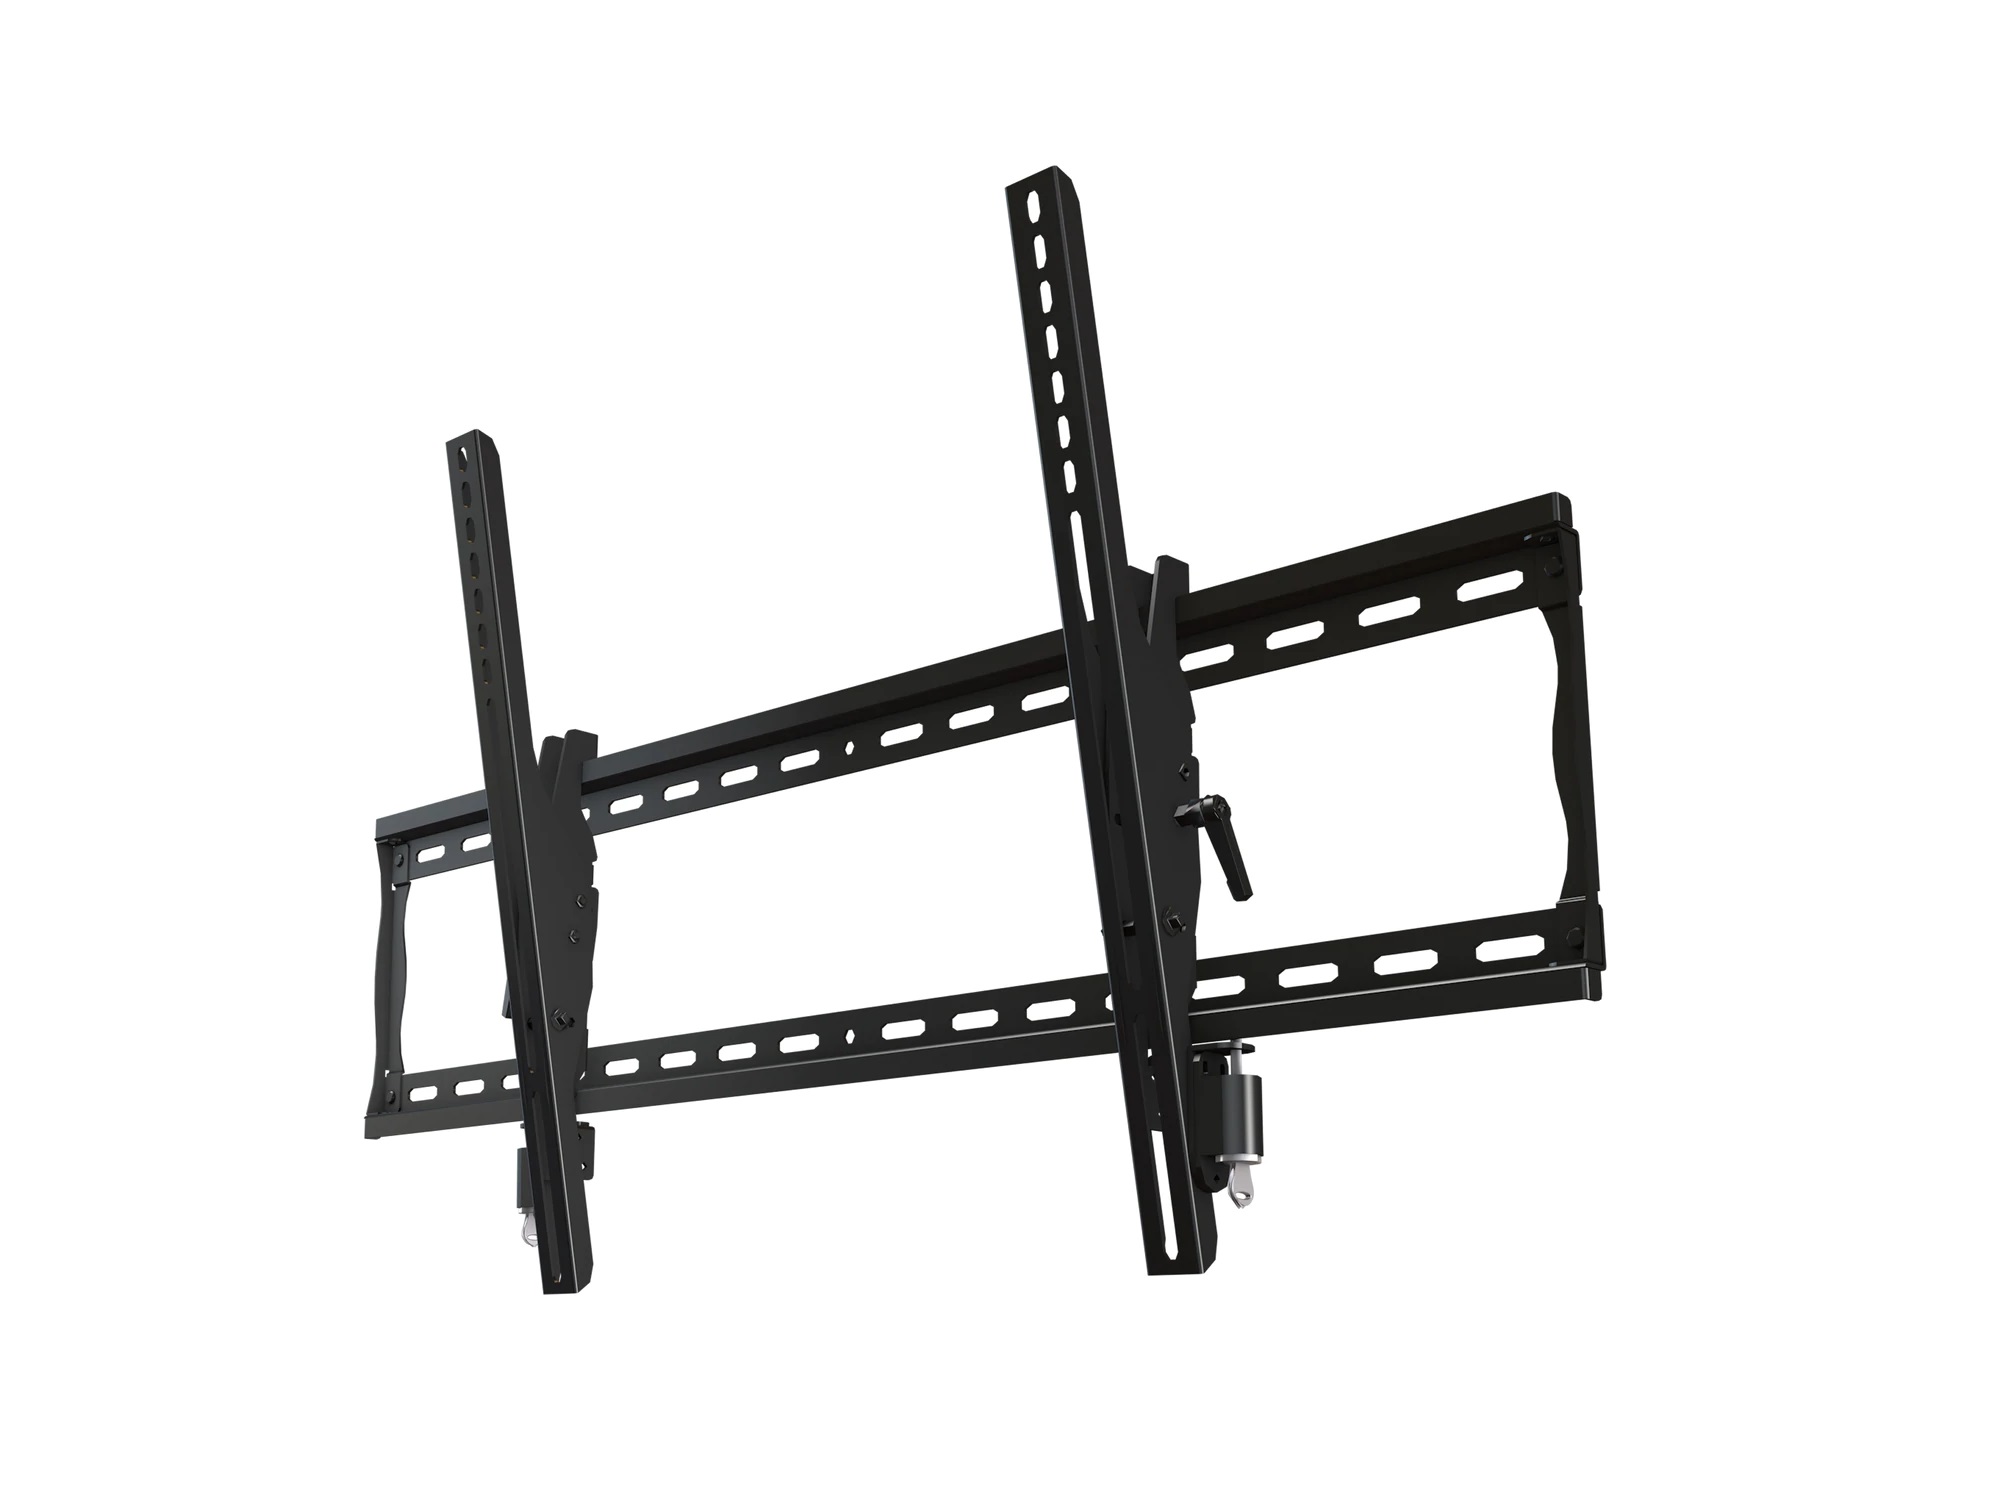 TM-T63SLC Tilting Outdoor TV Mount with Dual Locks by SEALOC